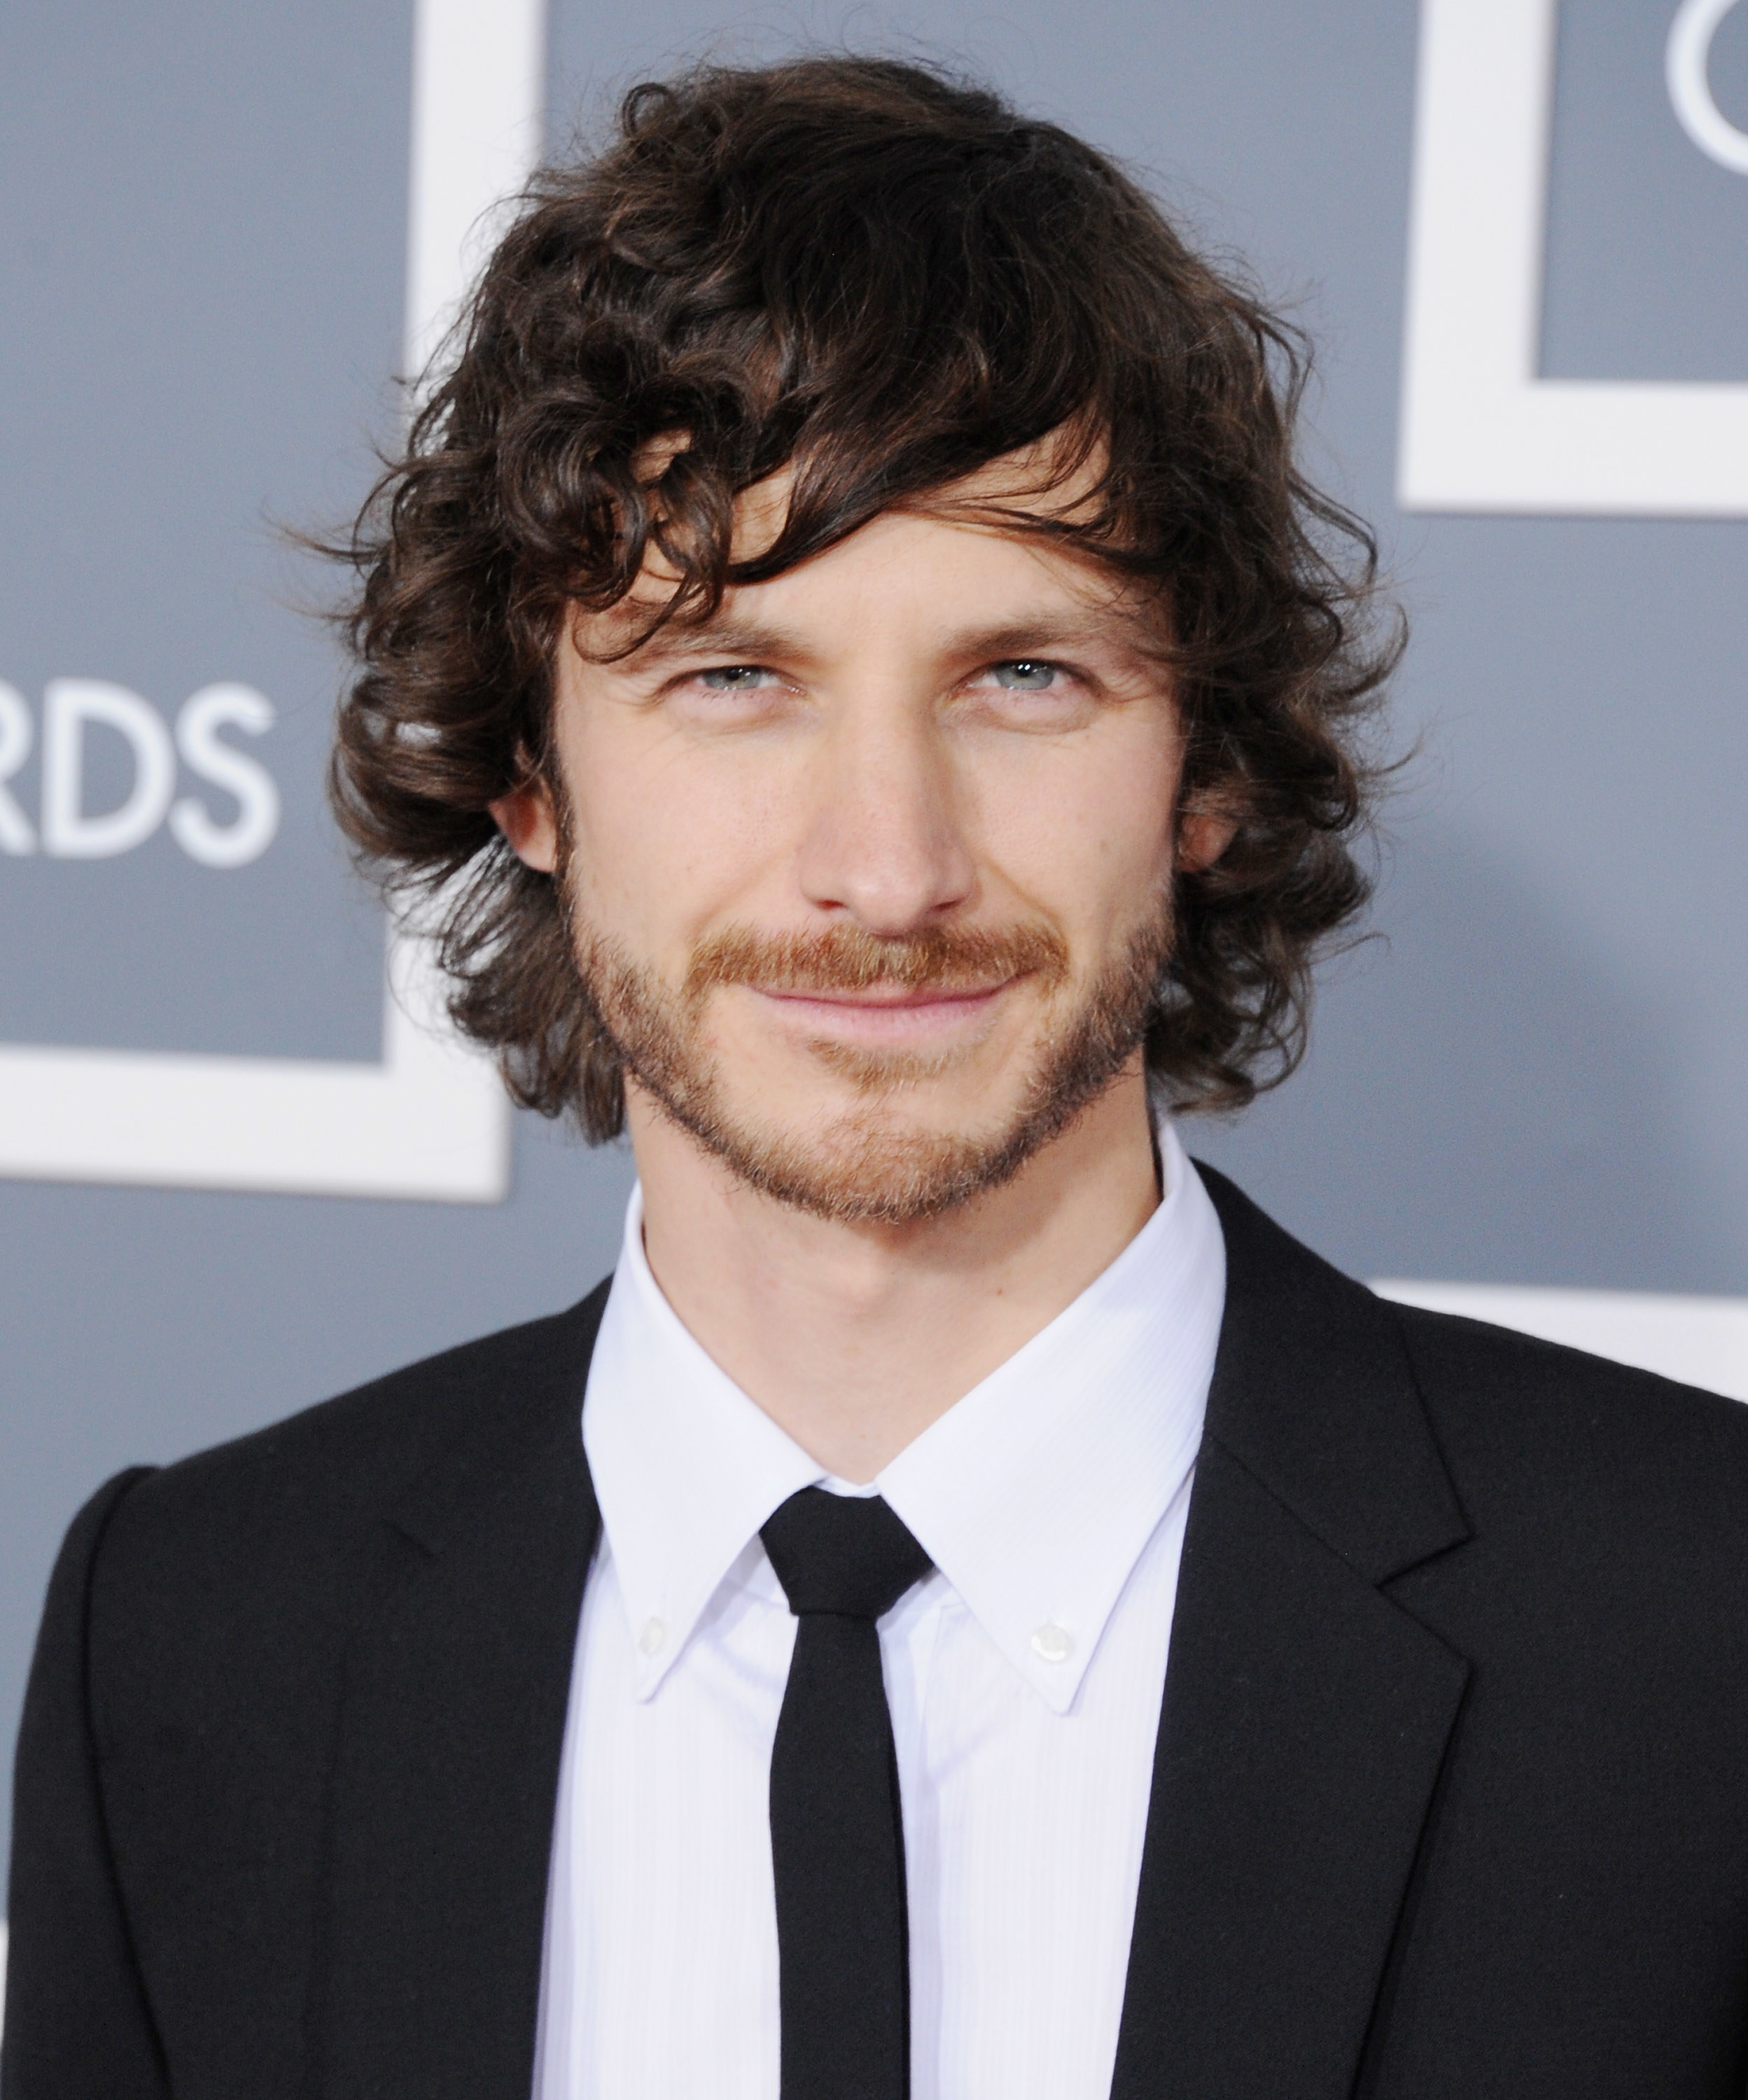 Gotye attends the Grammys on February 10, 2013